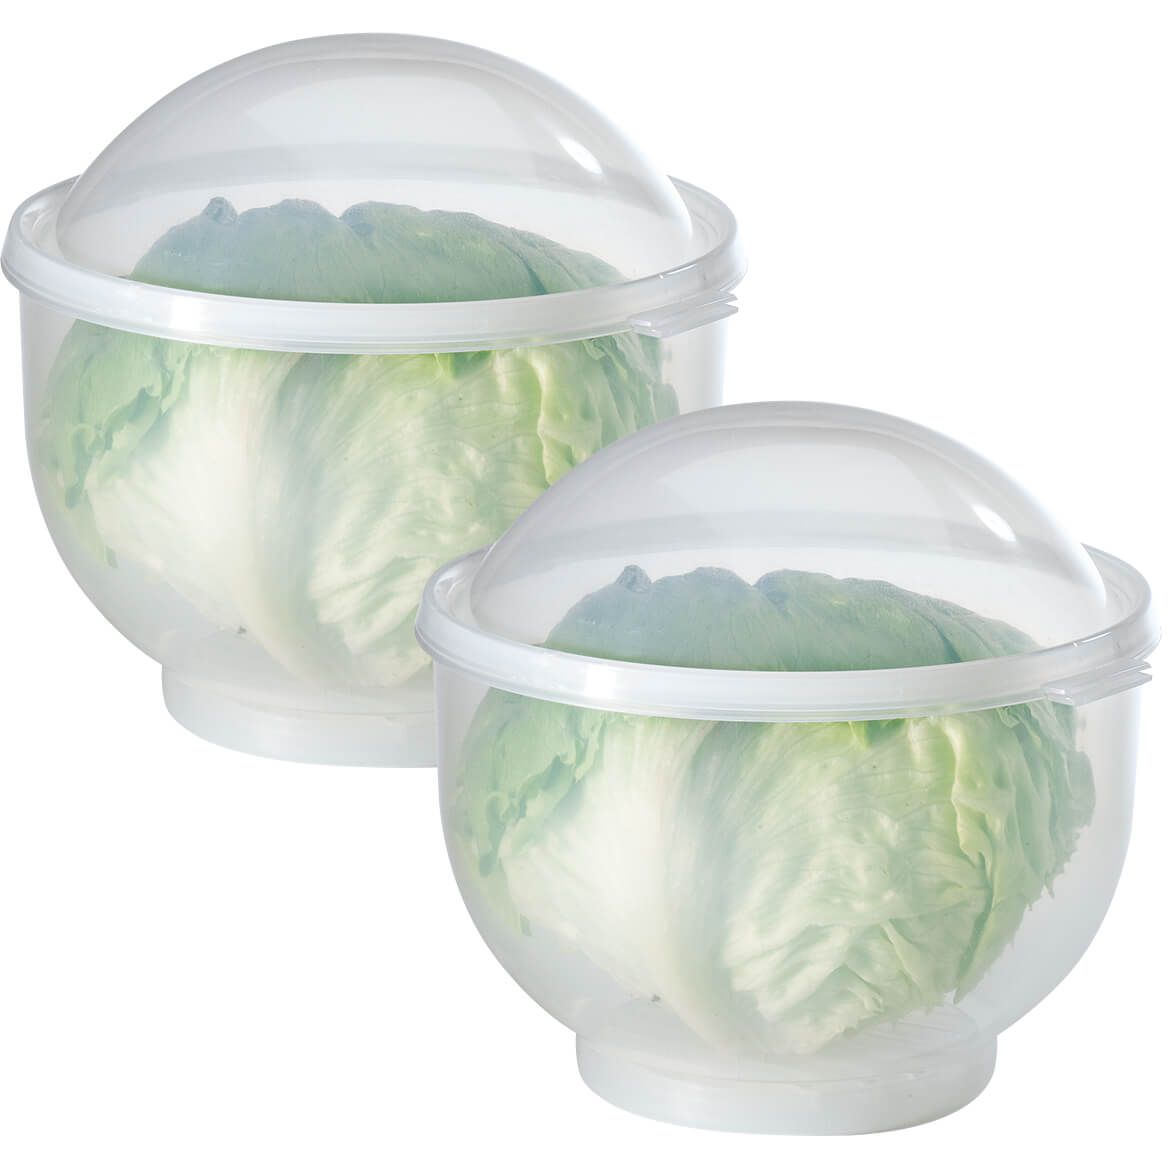 Lettuce Keepers, Set of 2 + '-' + 375065